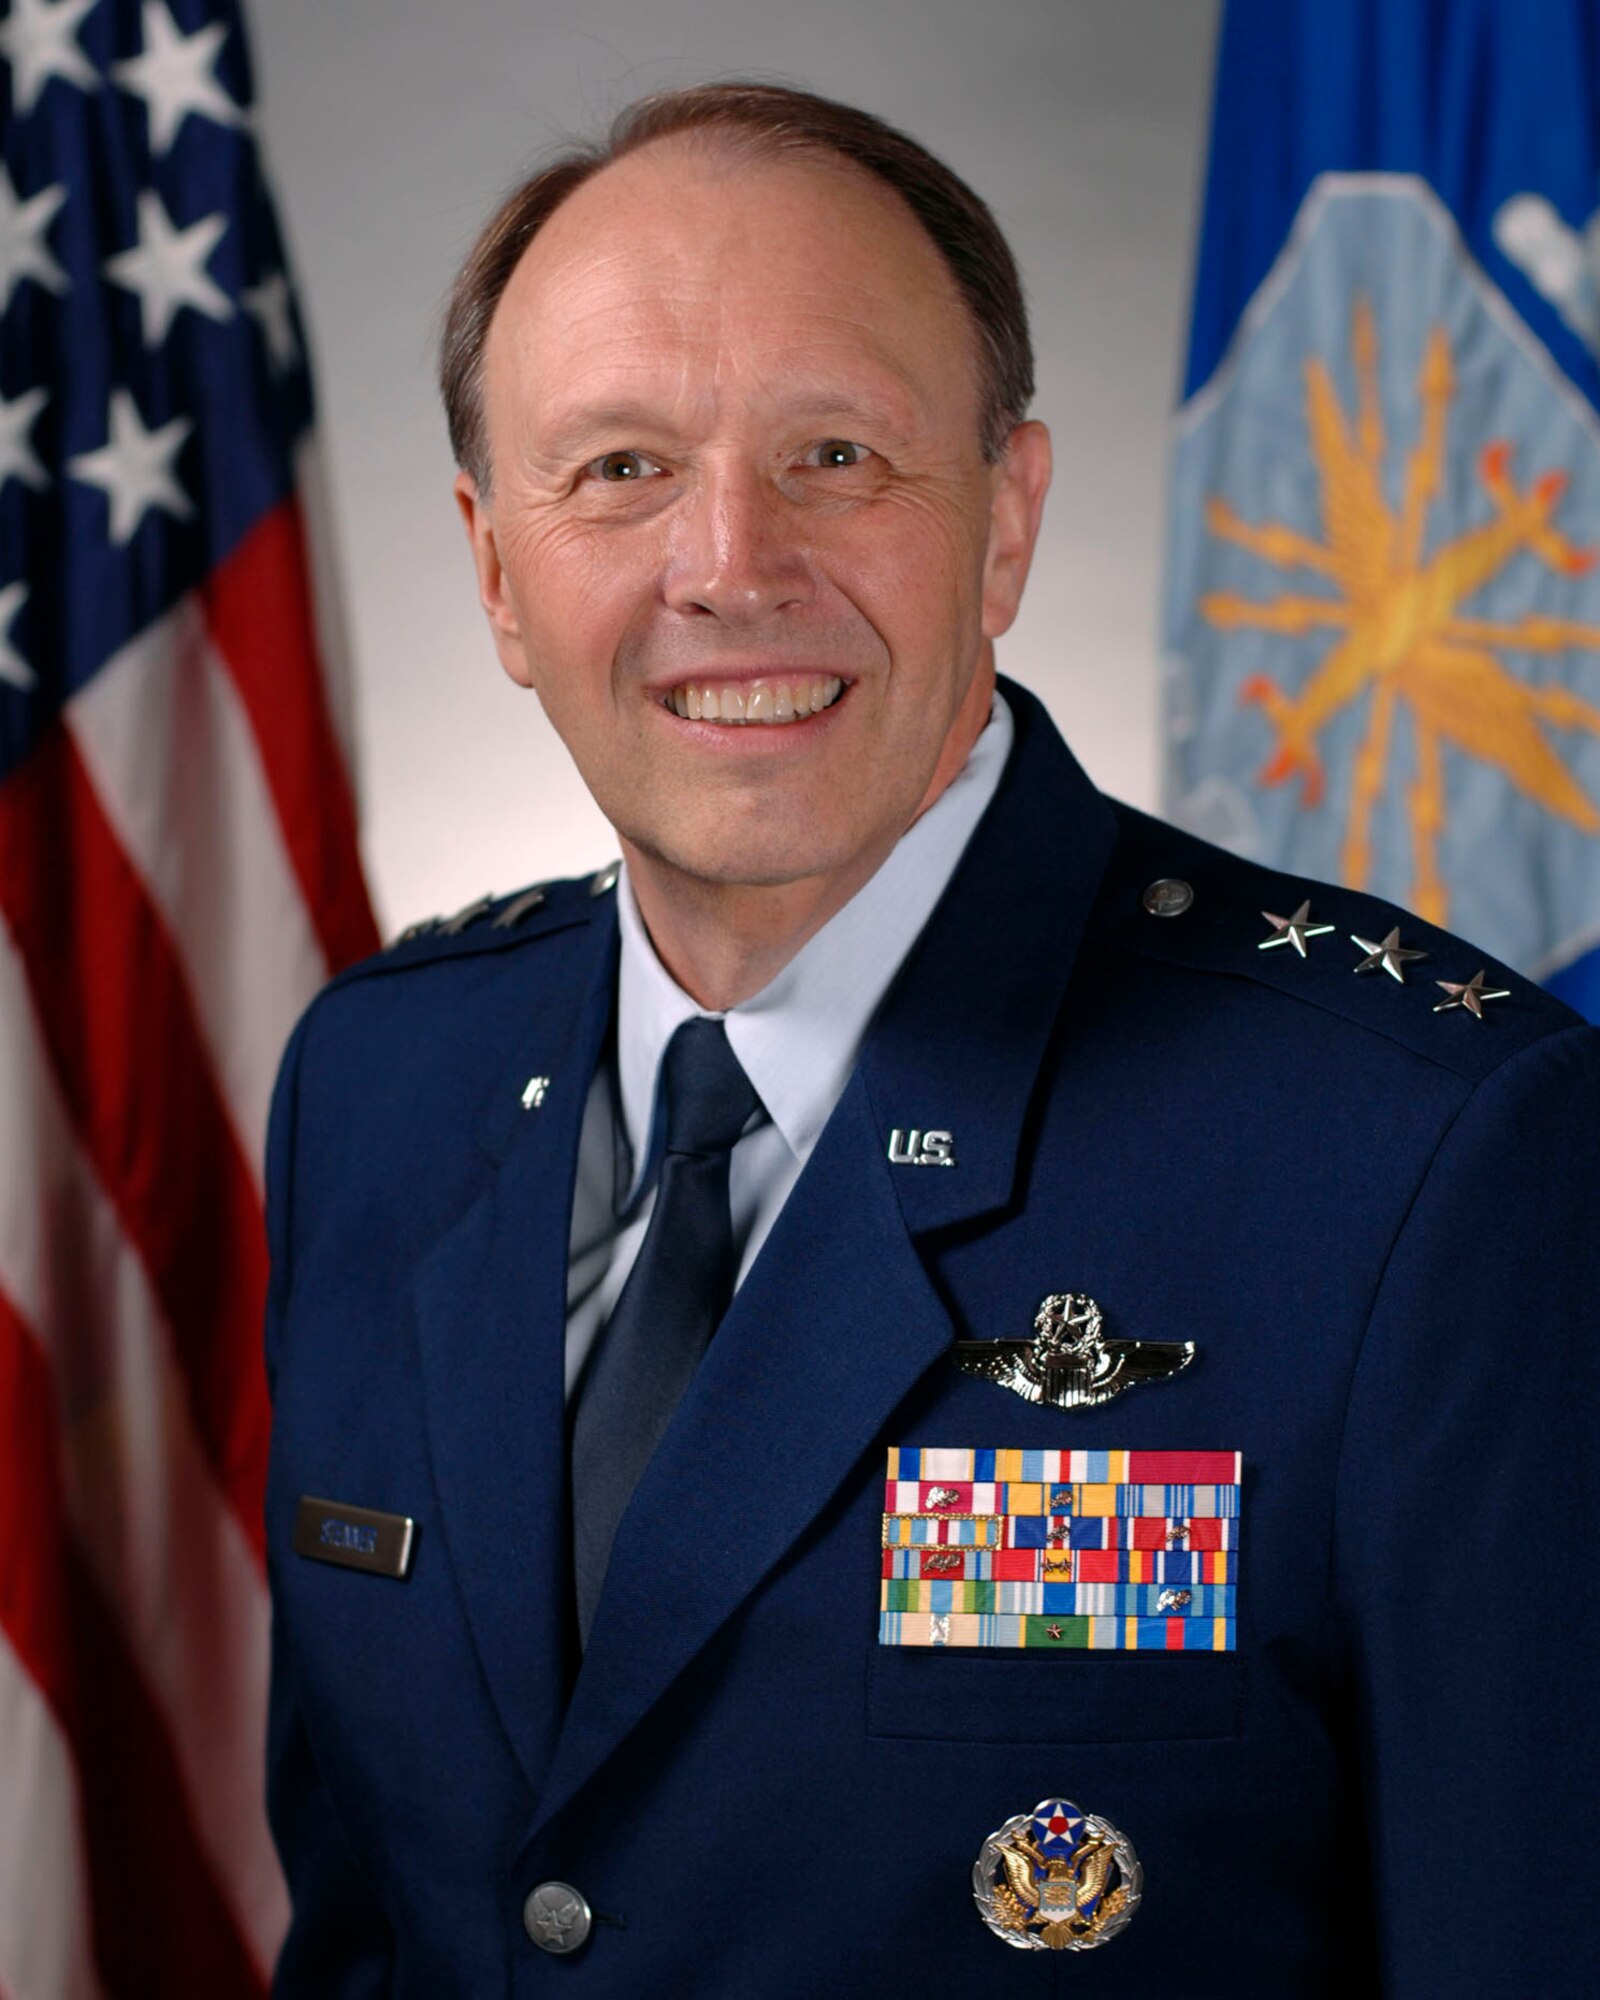 Lt. Gen. Charles E. Stenner Jr., is Chief of Air Force Reserve, Headquarters U.S. Air Force, Washington, D.C., and Commander, Air Force Reserve Command, Robins Air Force Base, Ga. 